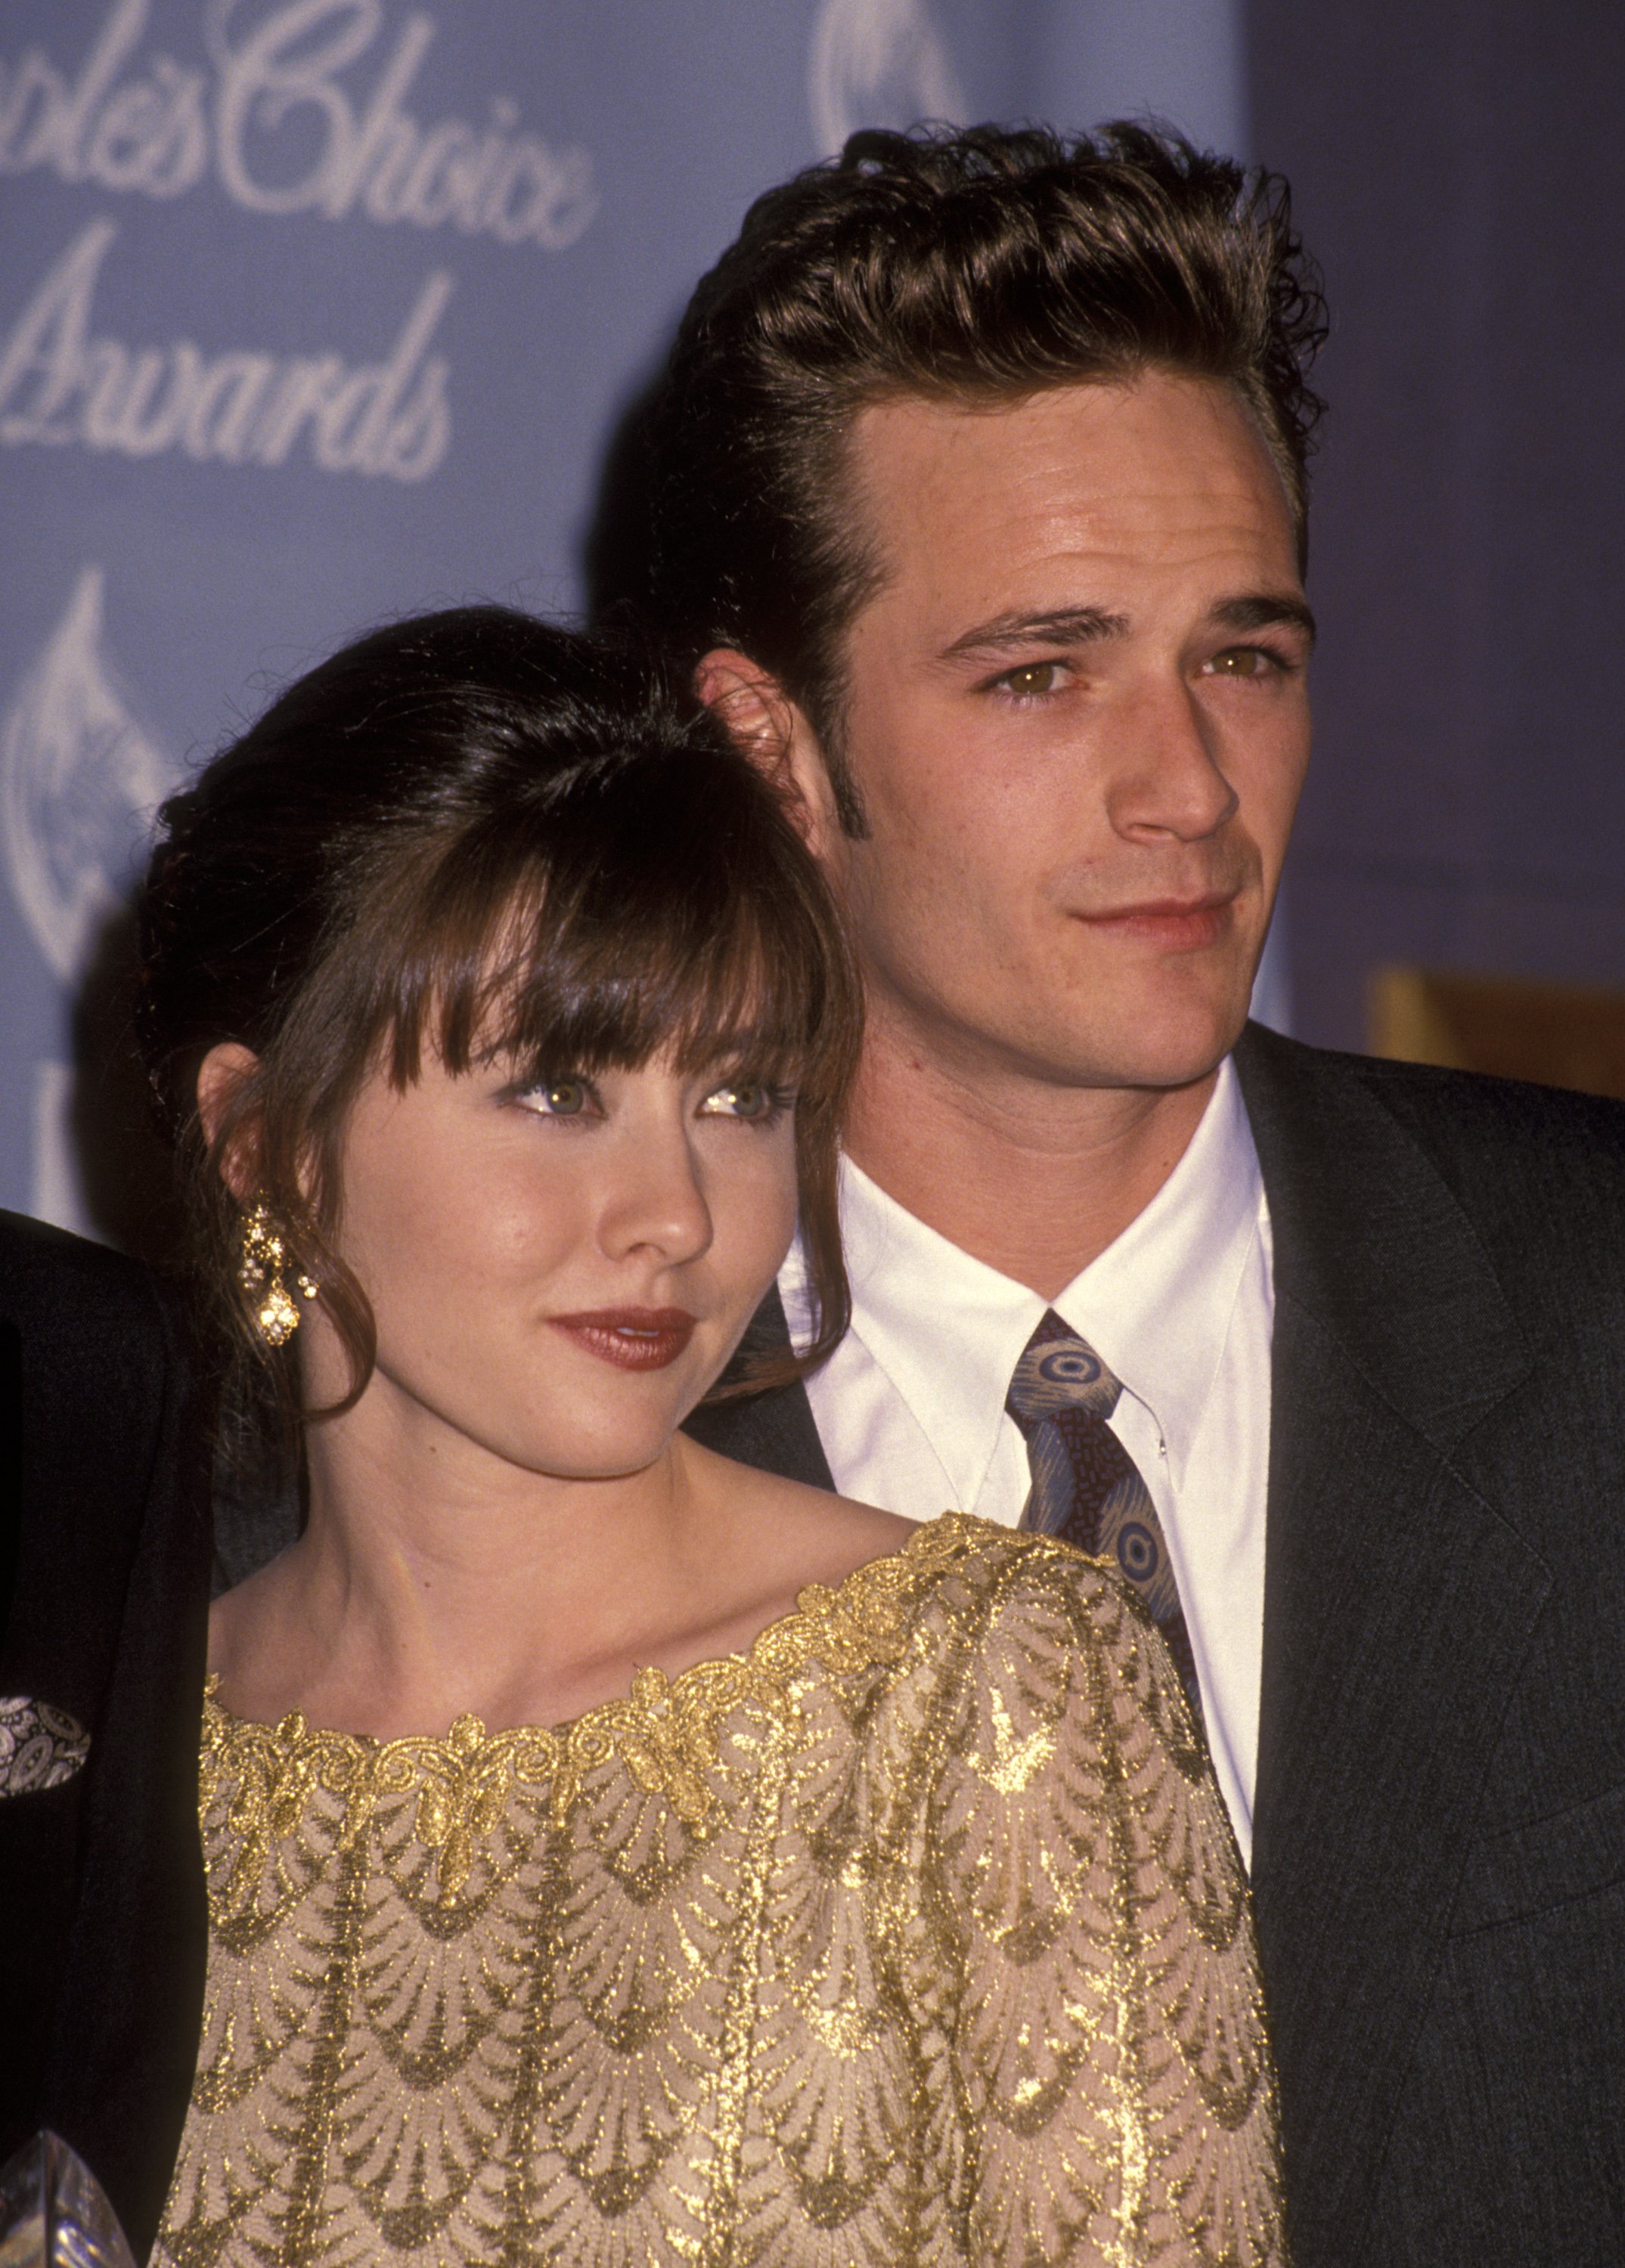 Shannen Doherty and Luke Perry at the 18th Annual People's Choice Awards, Universal Studios, Universal City | Source: Getty Images 